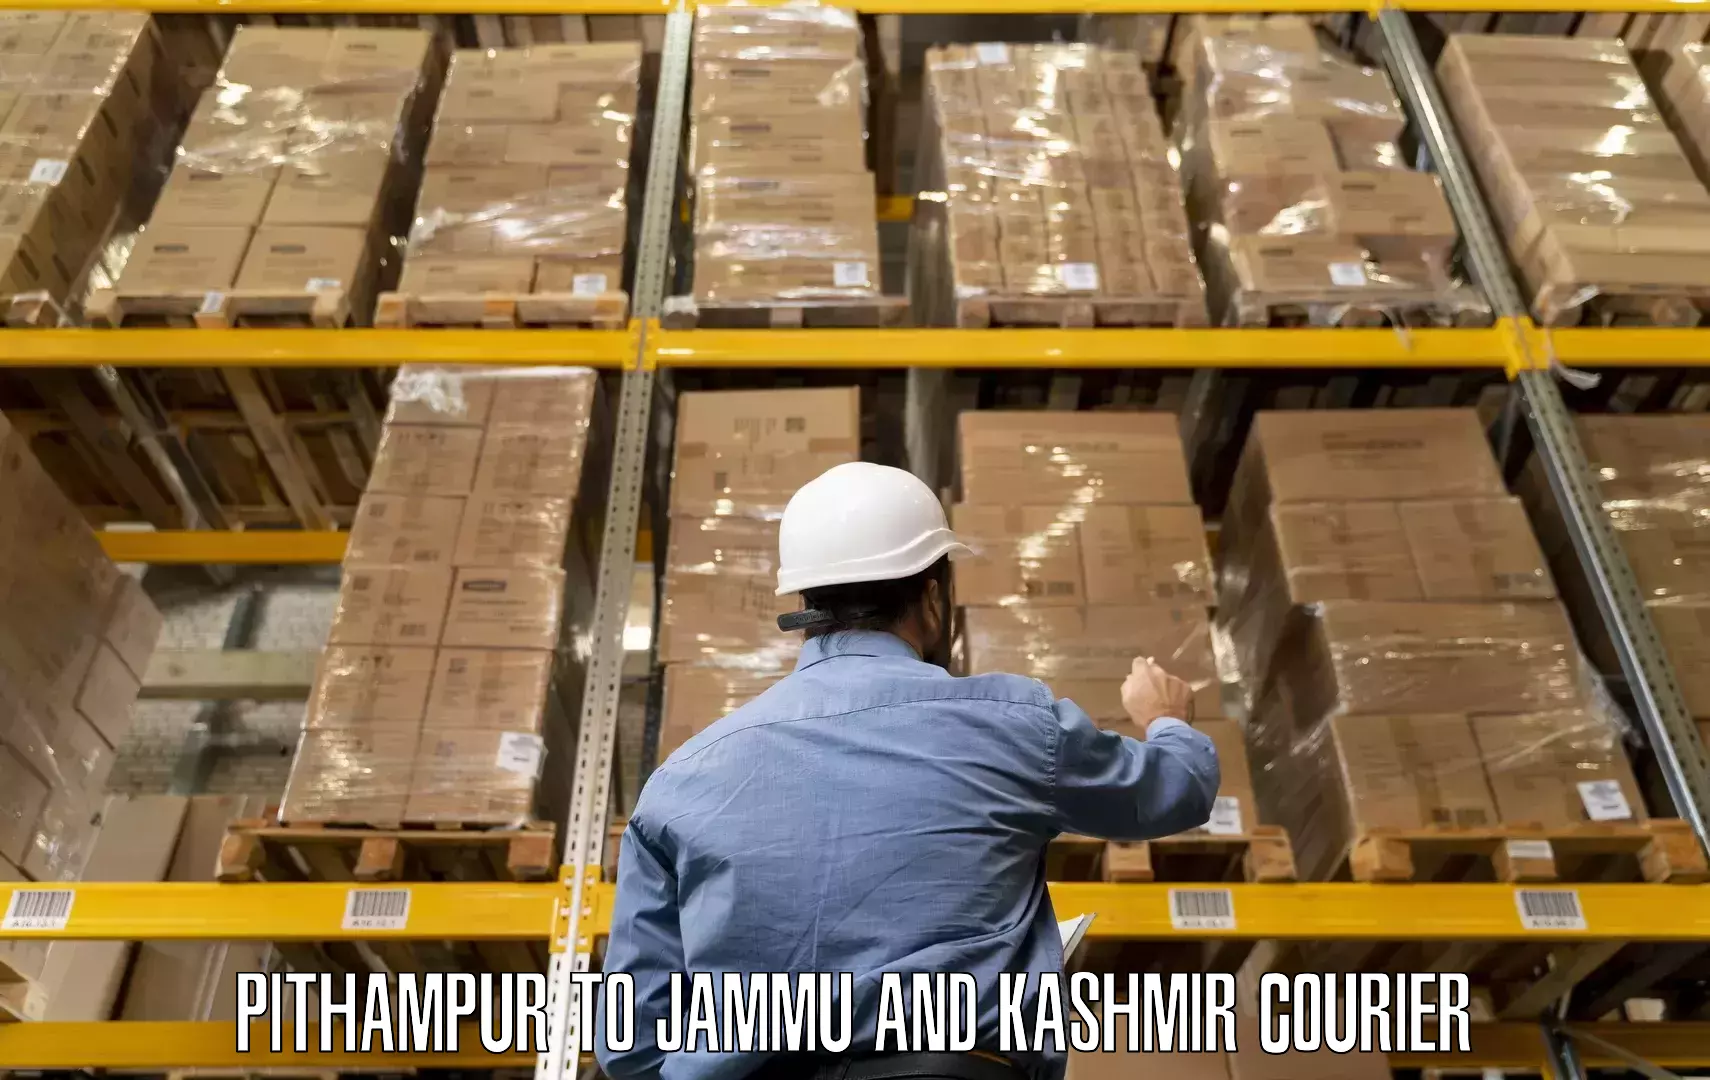 Home moving experts Pithampur to Jammu and Kashmir